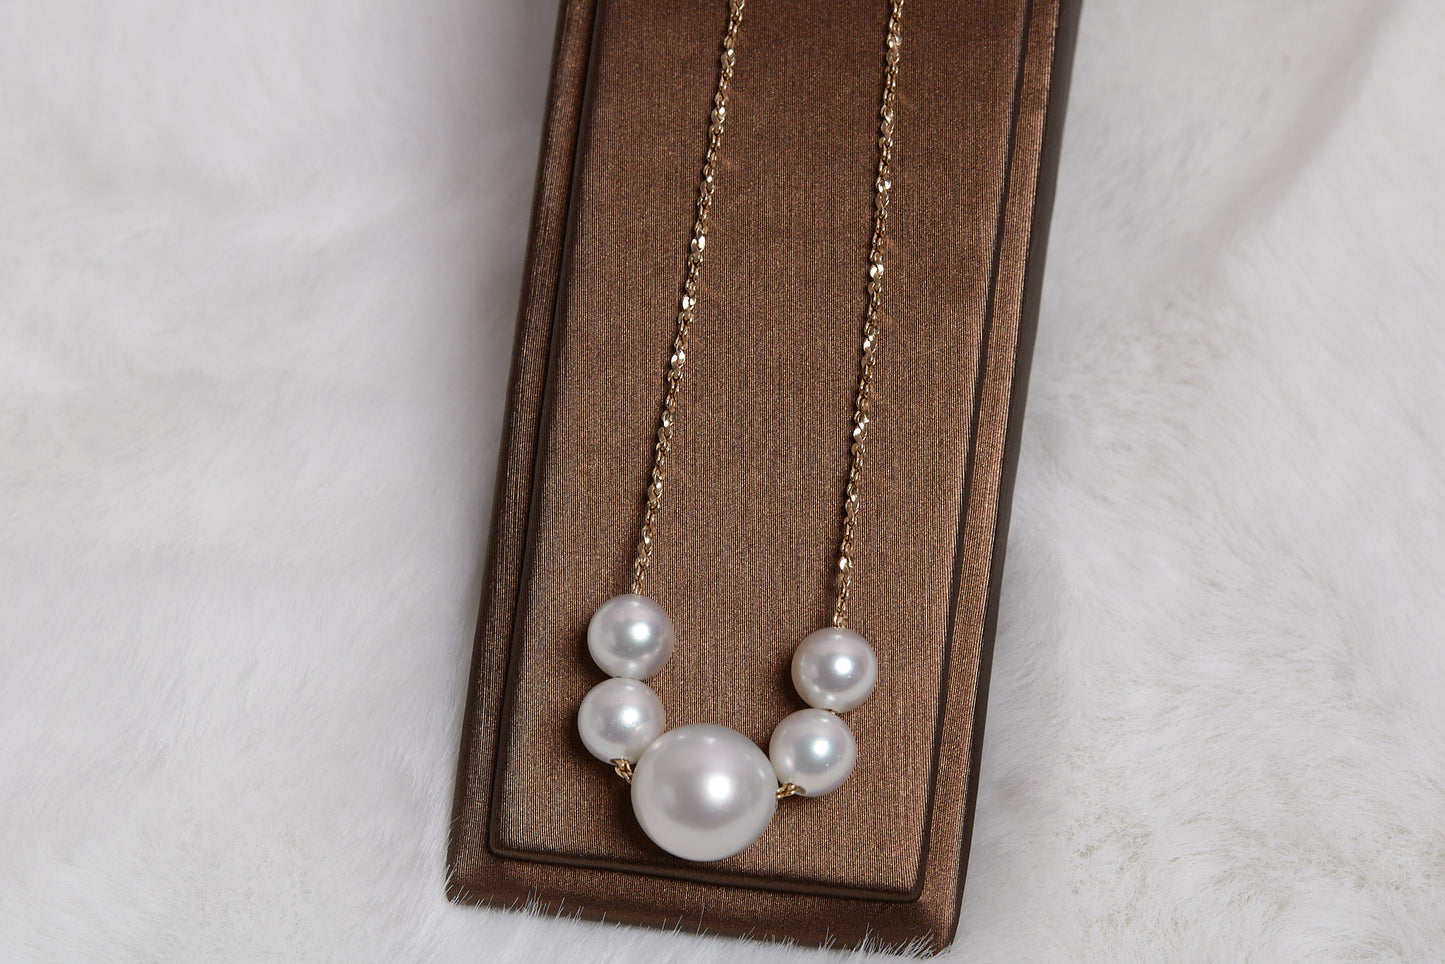 Japanese Akoya and white South Sea Pearl with 18K Gold Necklace